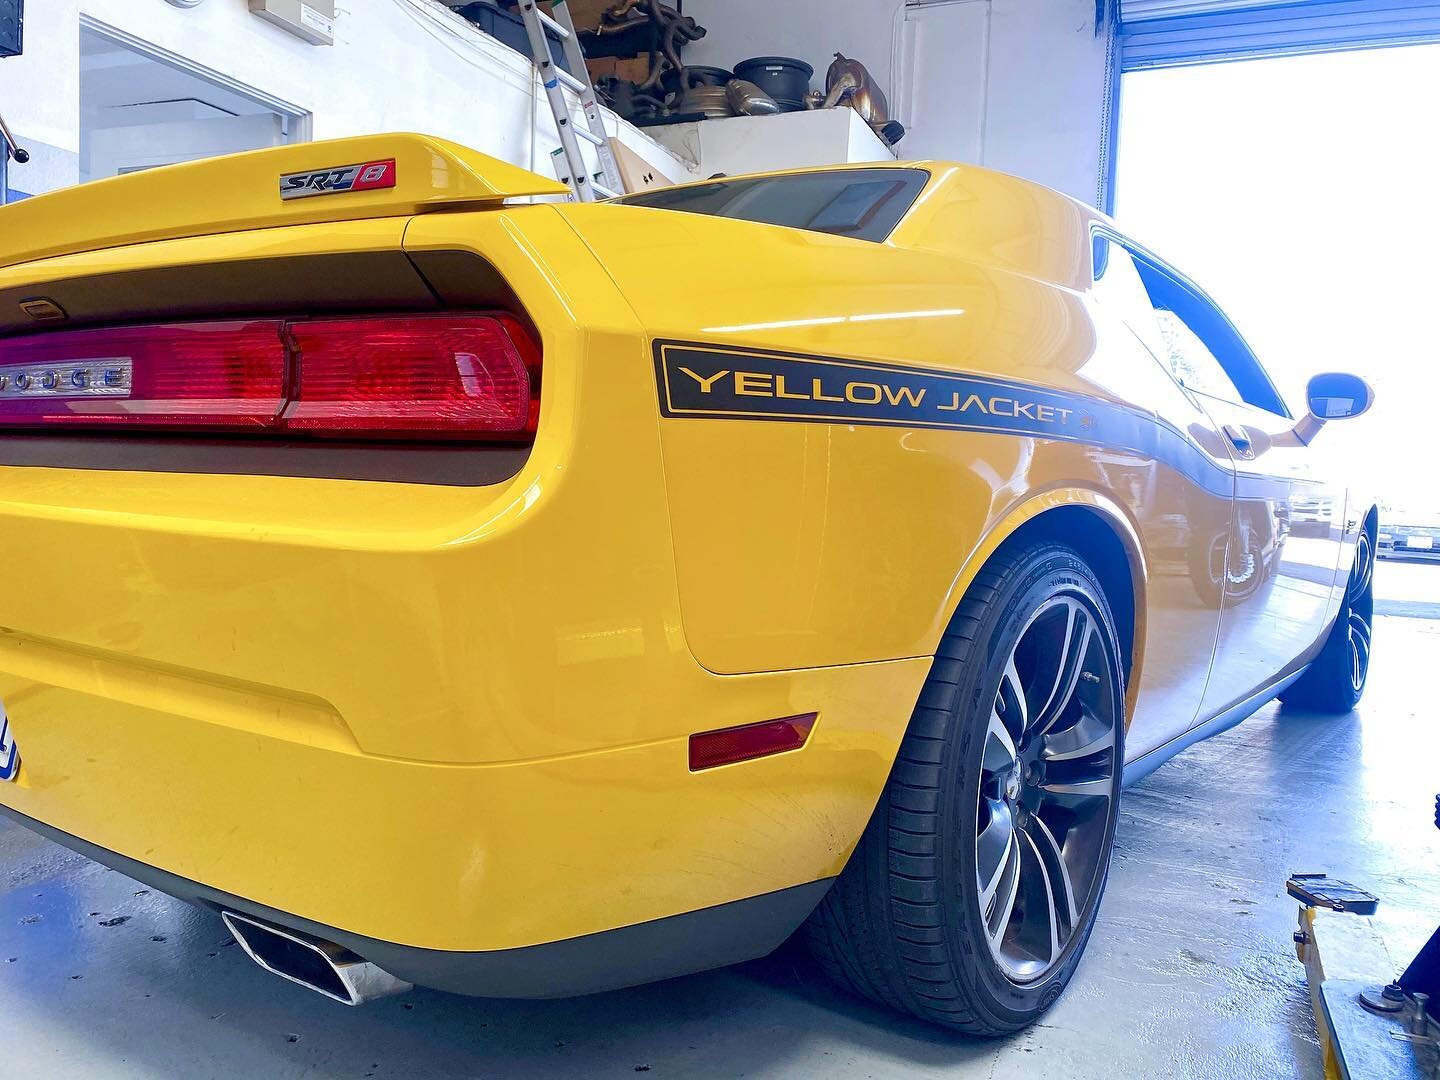 SRT8 392 Yellow Jacket with a mean HEMI V8. Only 1300 were made and we just got to service one. We may specialize in European cars but we appreciate all type of makes and models. 💛🟡
.
.
.
.
#dodge #challenger #srt8 #yellowjacket #hemi #hemipower #h